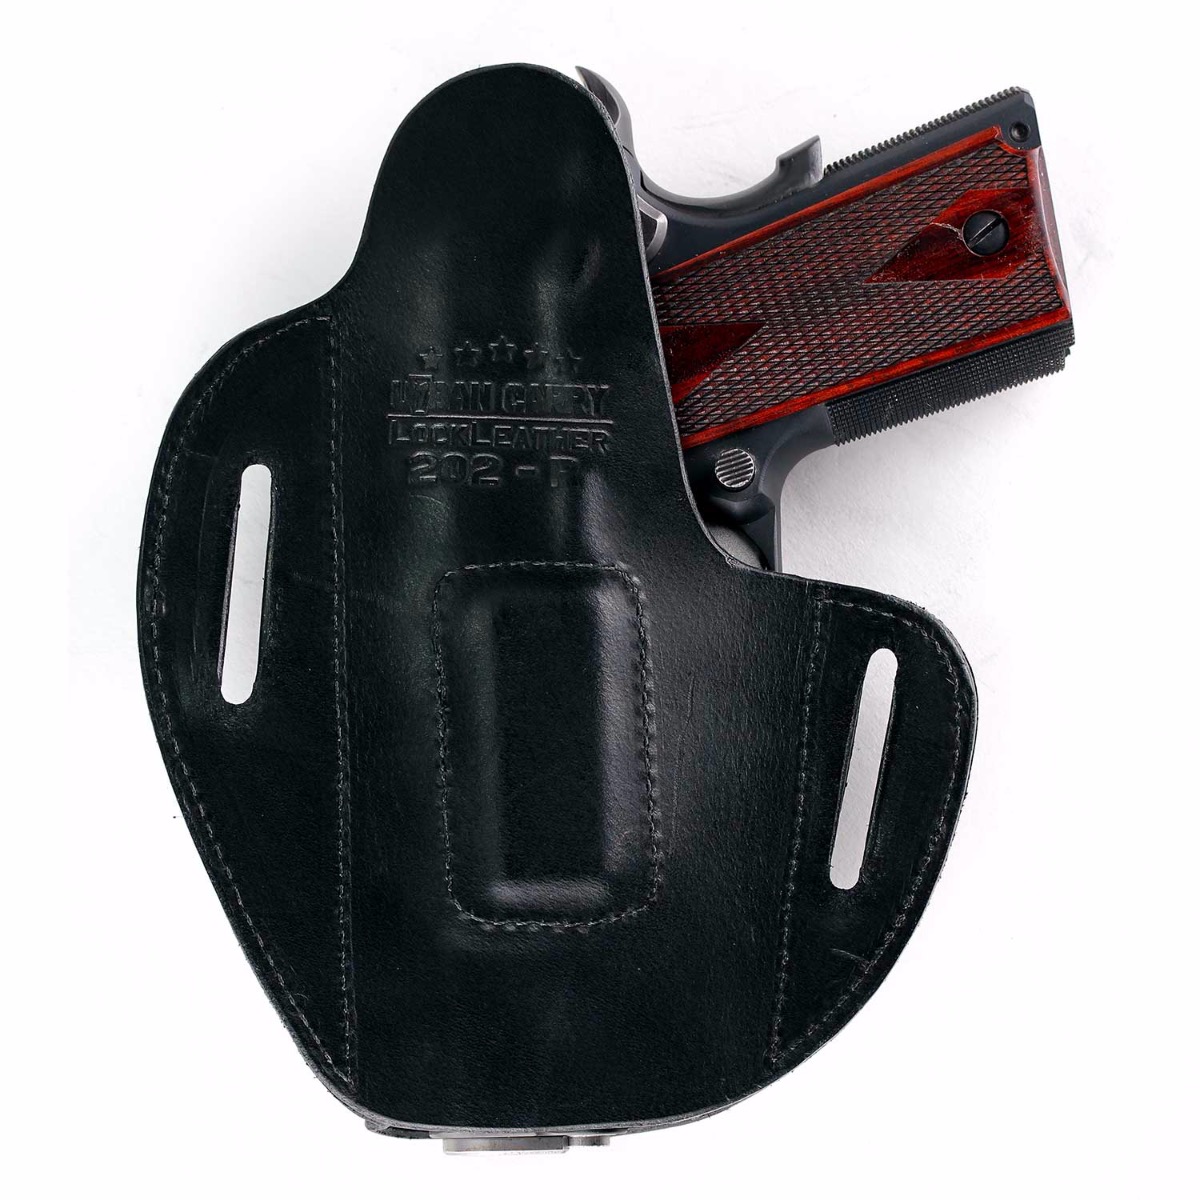 NEW) Genderfree Modular + Adjustable Utility Holster Harness with